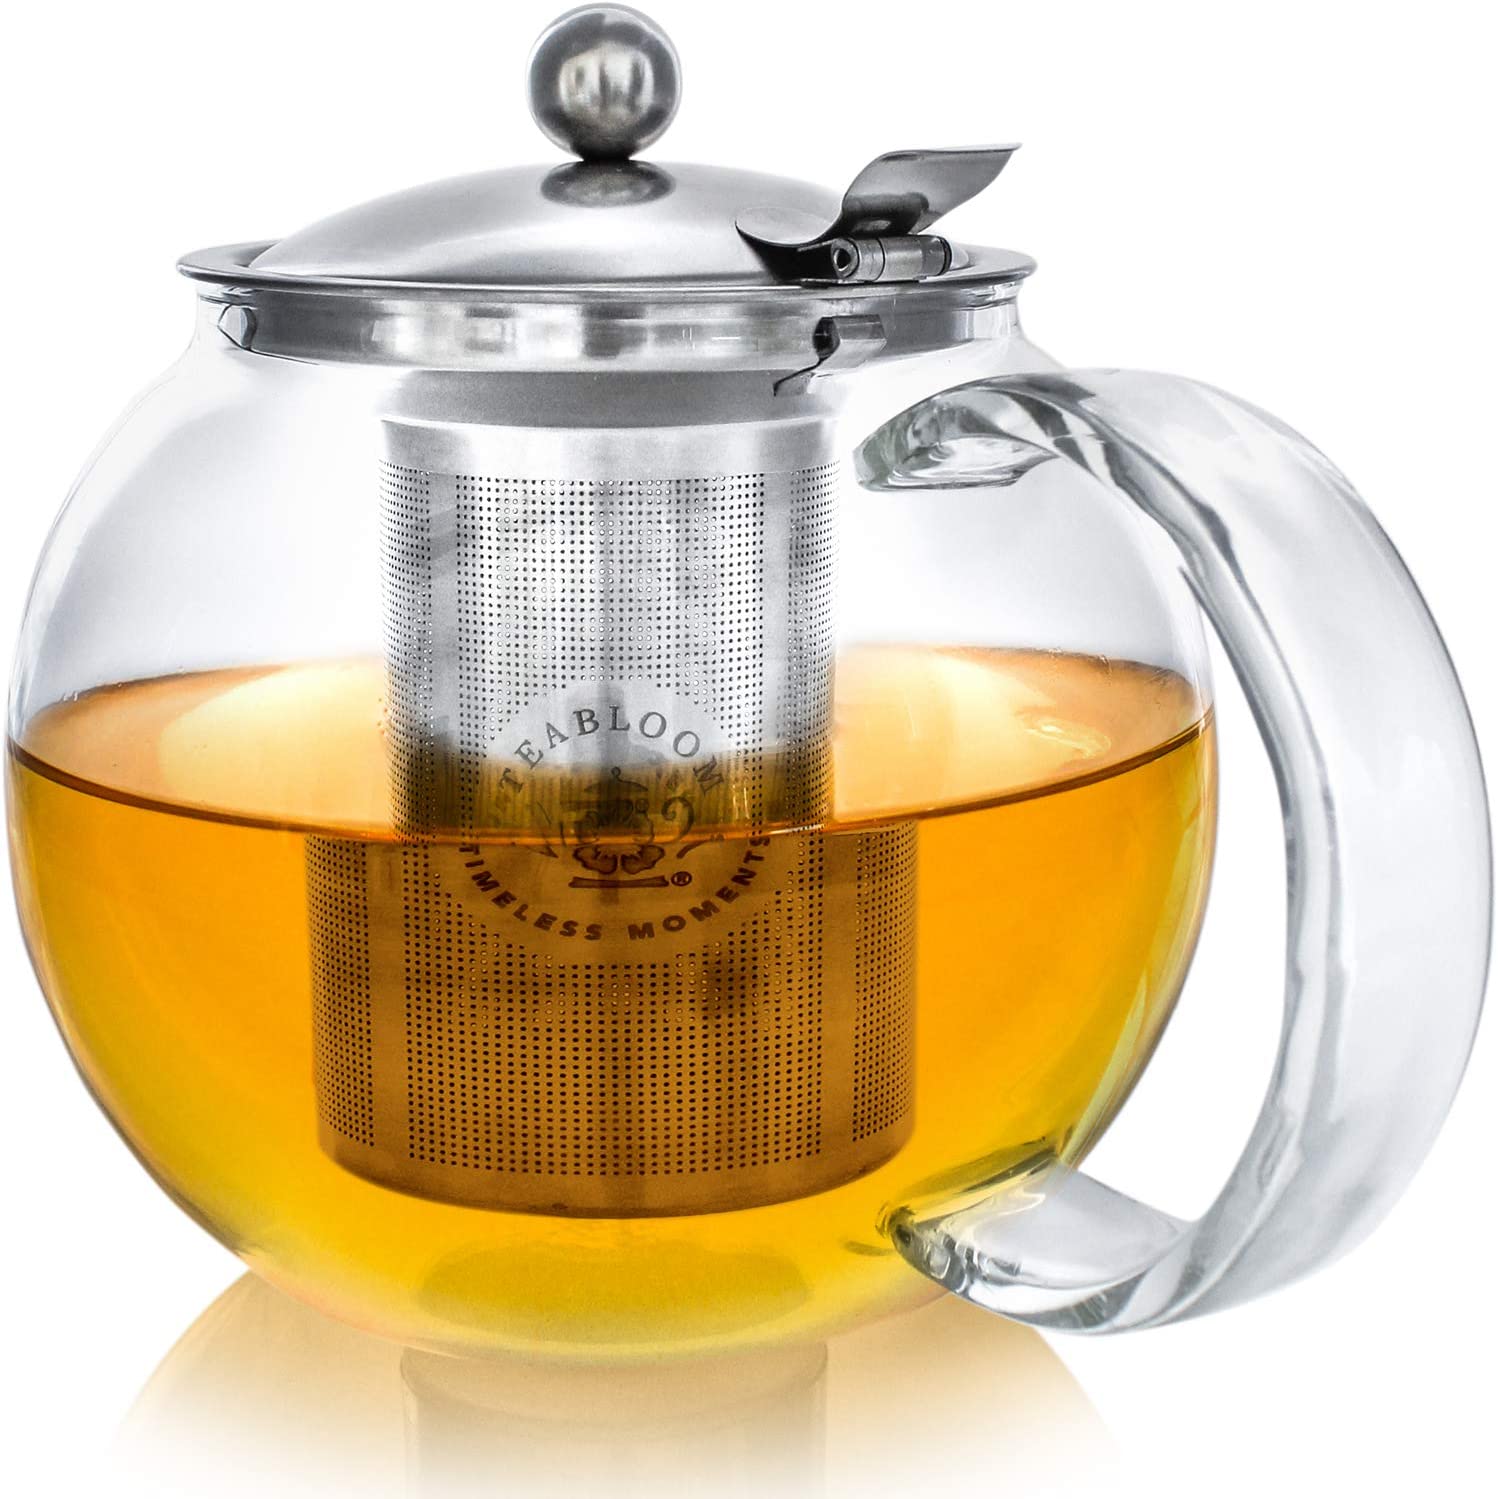 Teabloom Classica Teapot for Everyday Use - Stove Top Safe Glass Teapot - 1200 ml Capacity - Removable Stainless Steel Tea Infuser